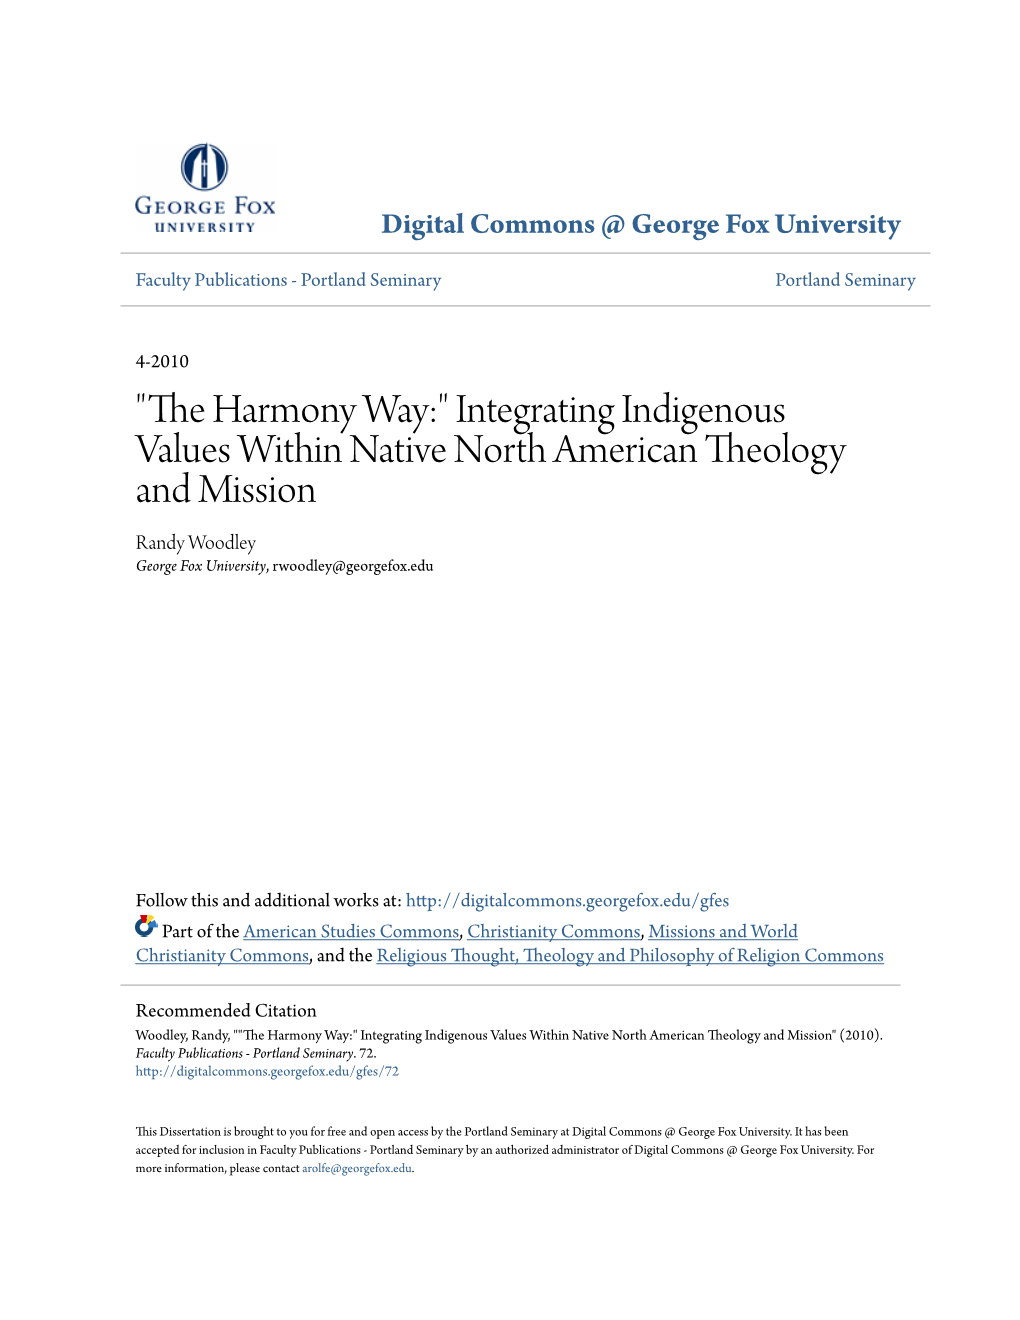 "The Harmony Way:" Integrating Indigenous Values Within Native North American Theology and Mission